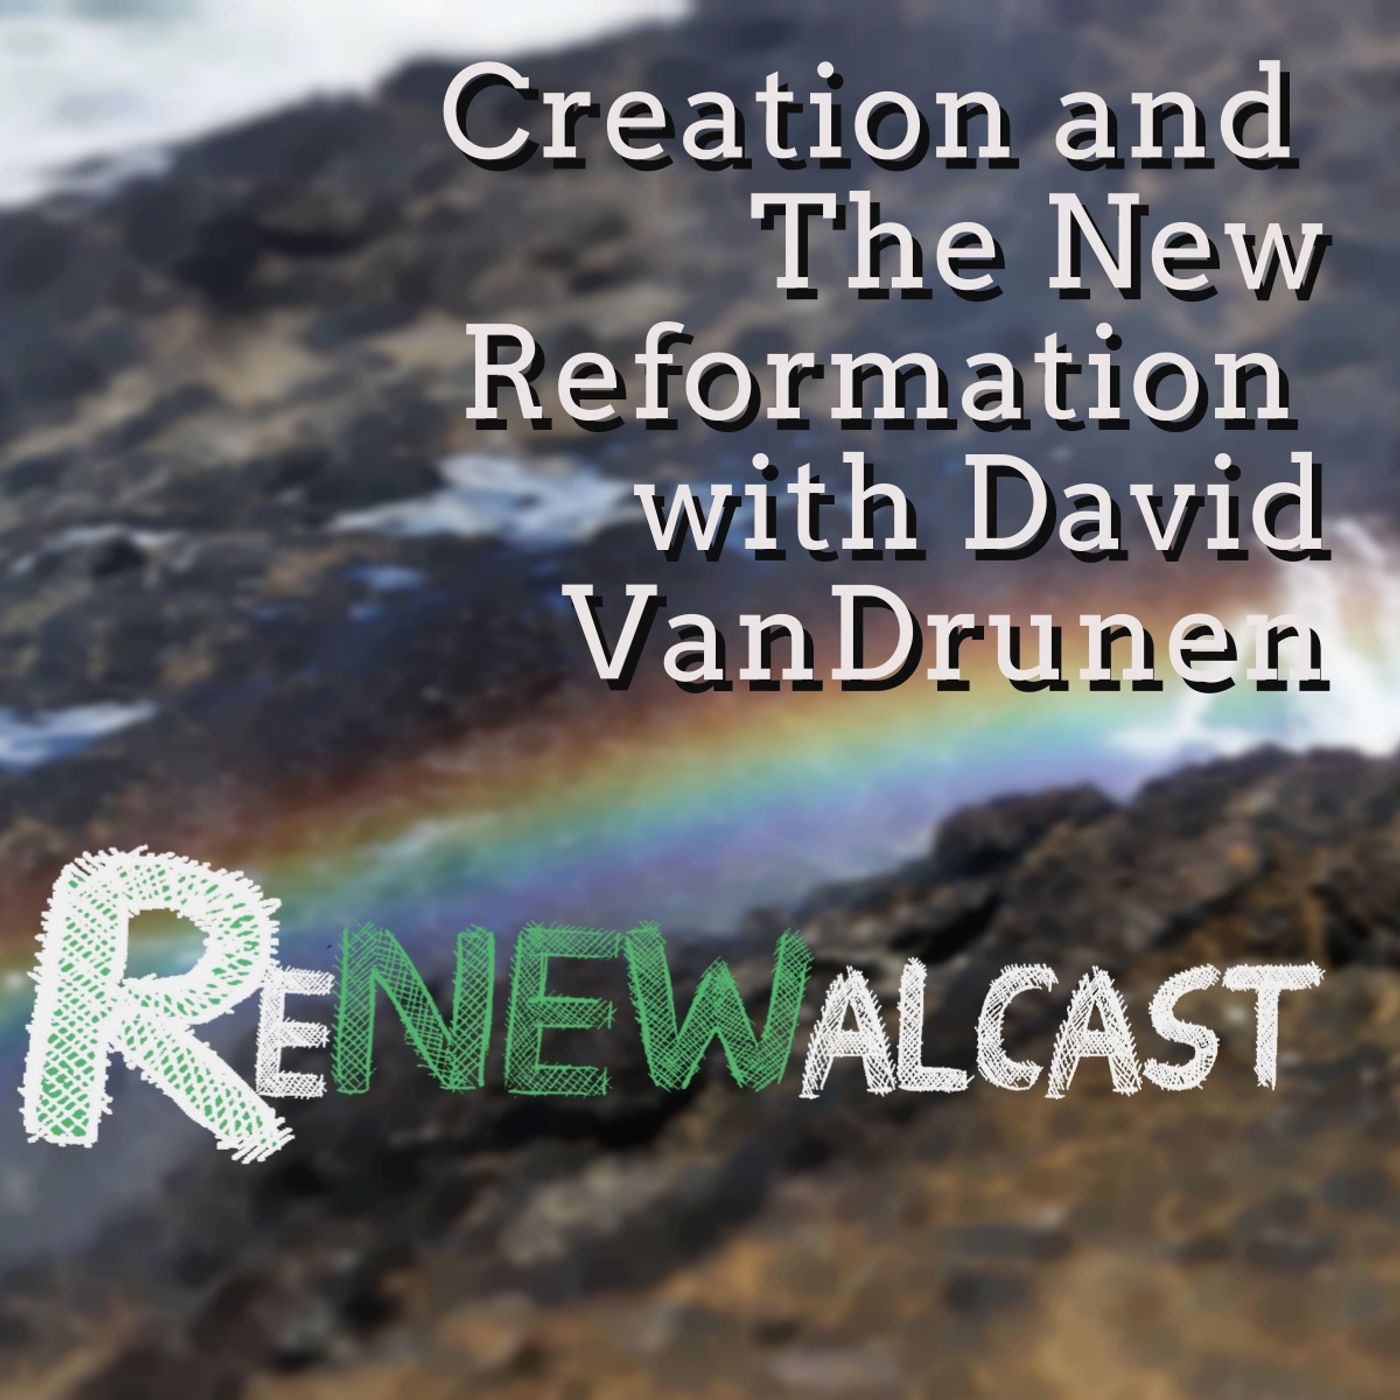 Creation and the The New Reformation with David VanDrunen